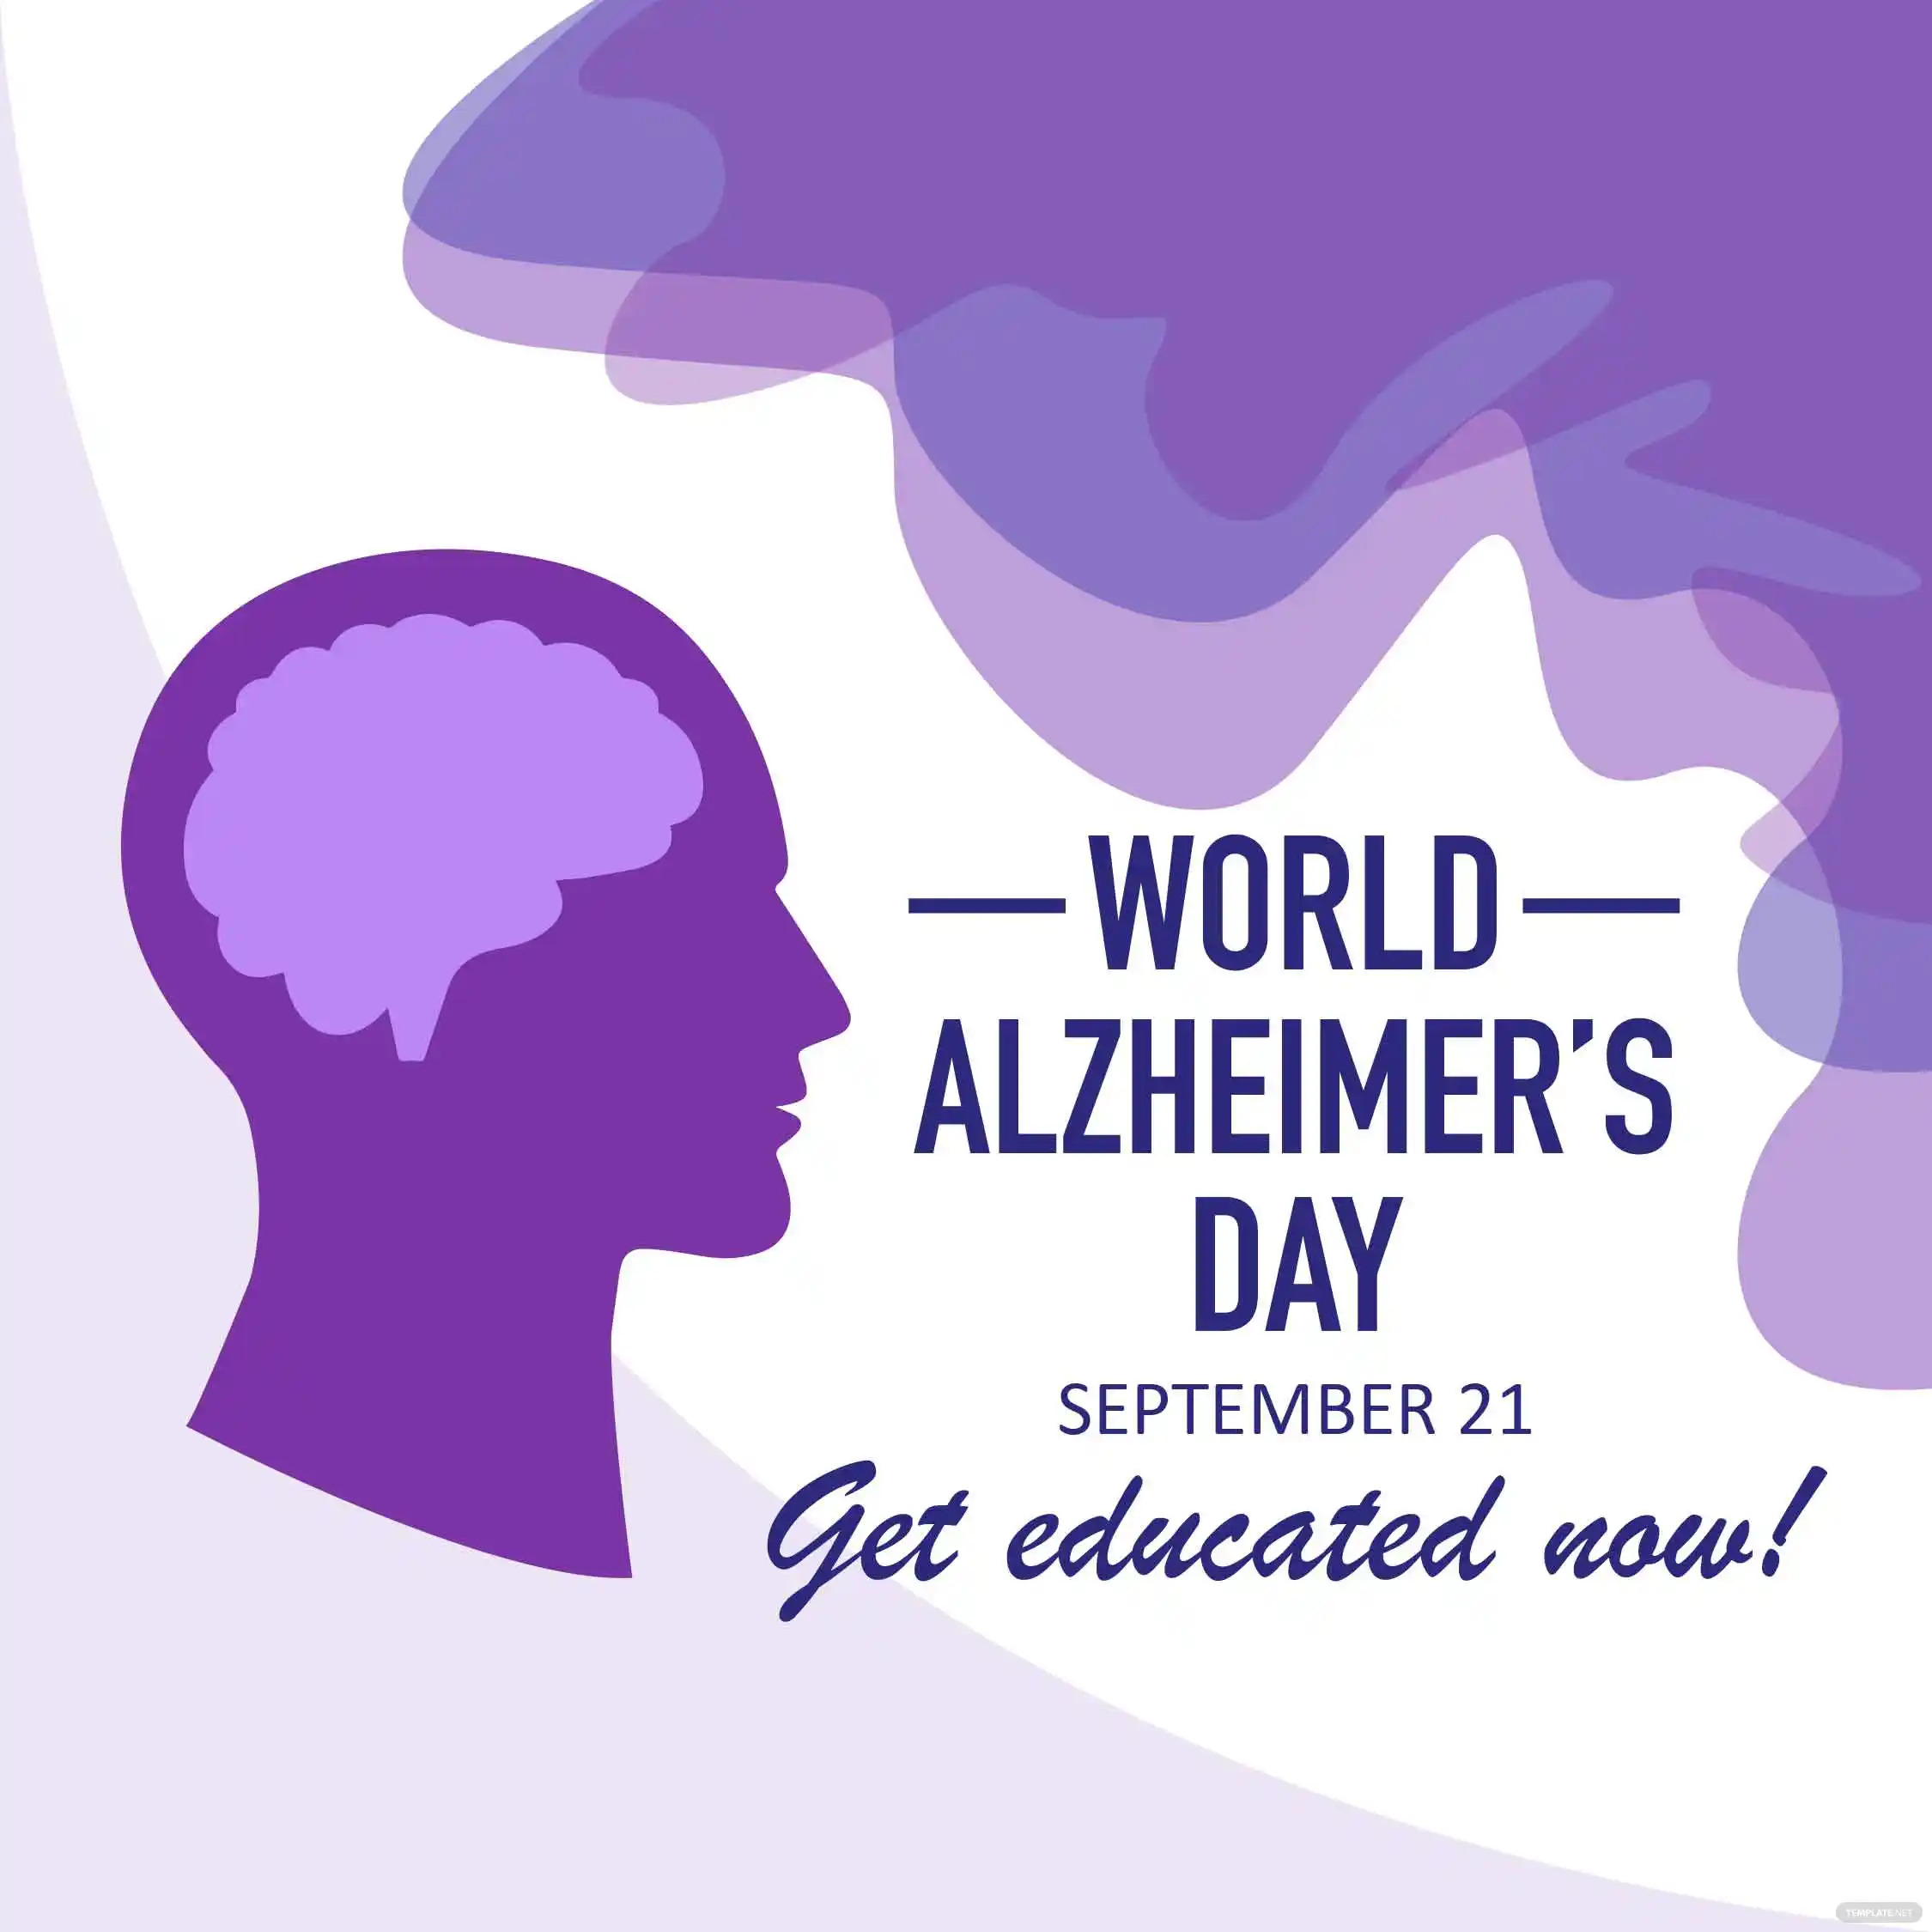 world alzheimer’s day instagram post ideas and examples